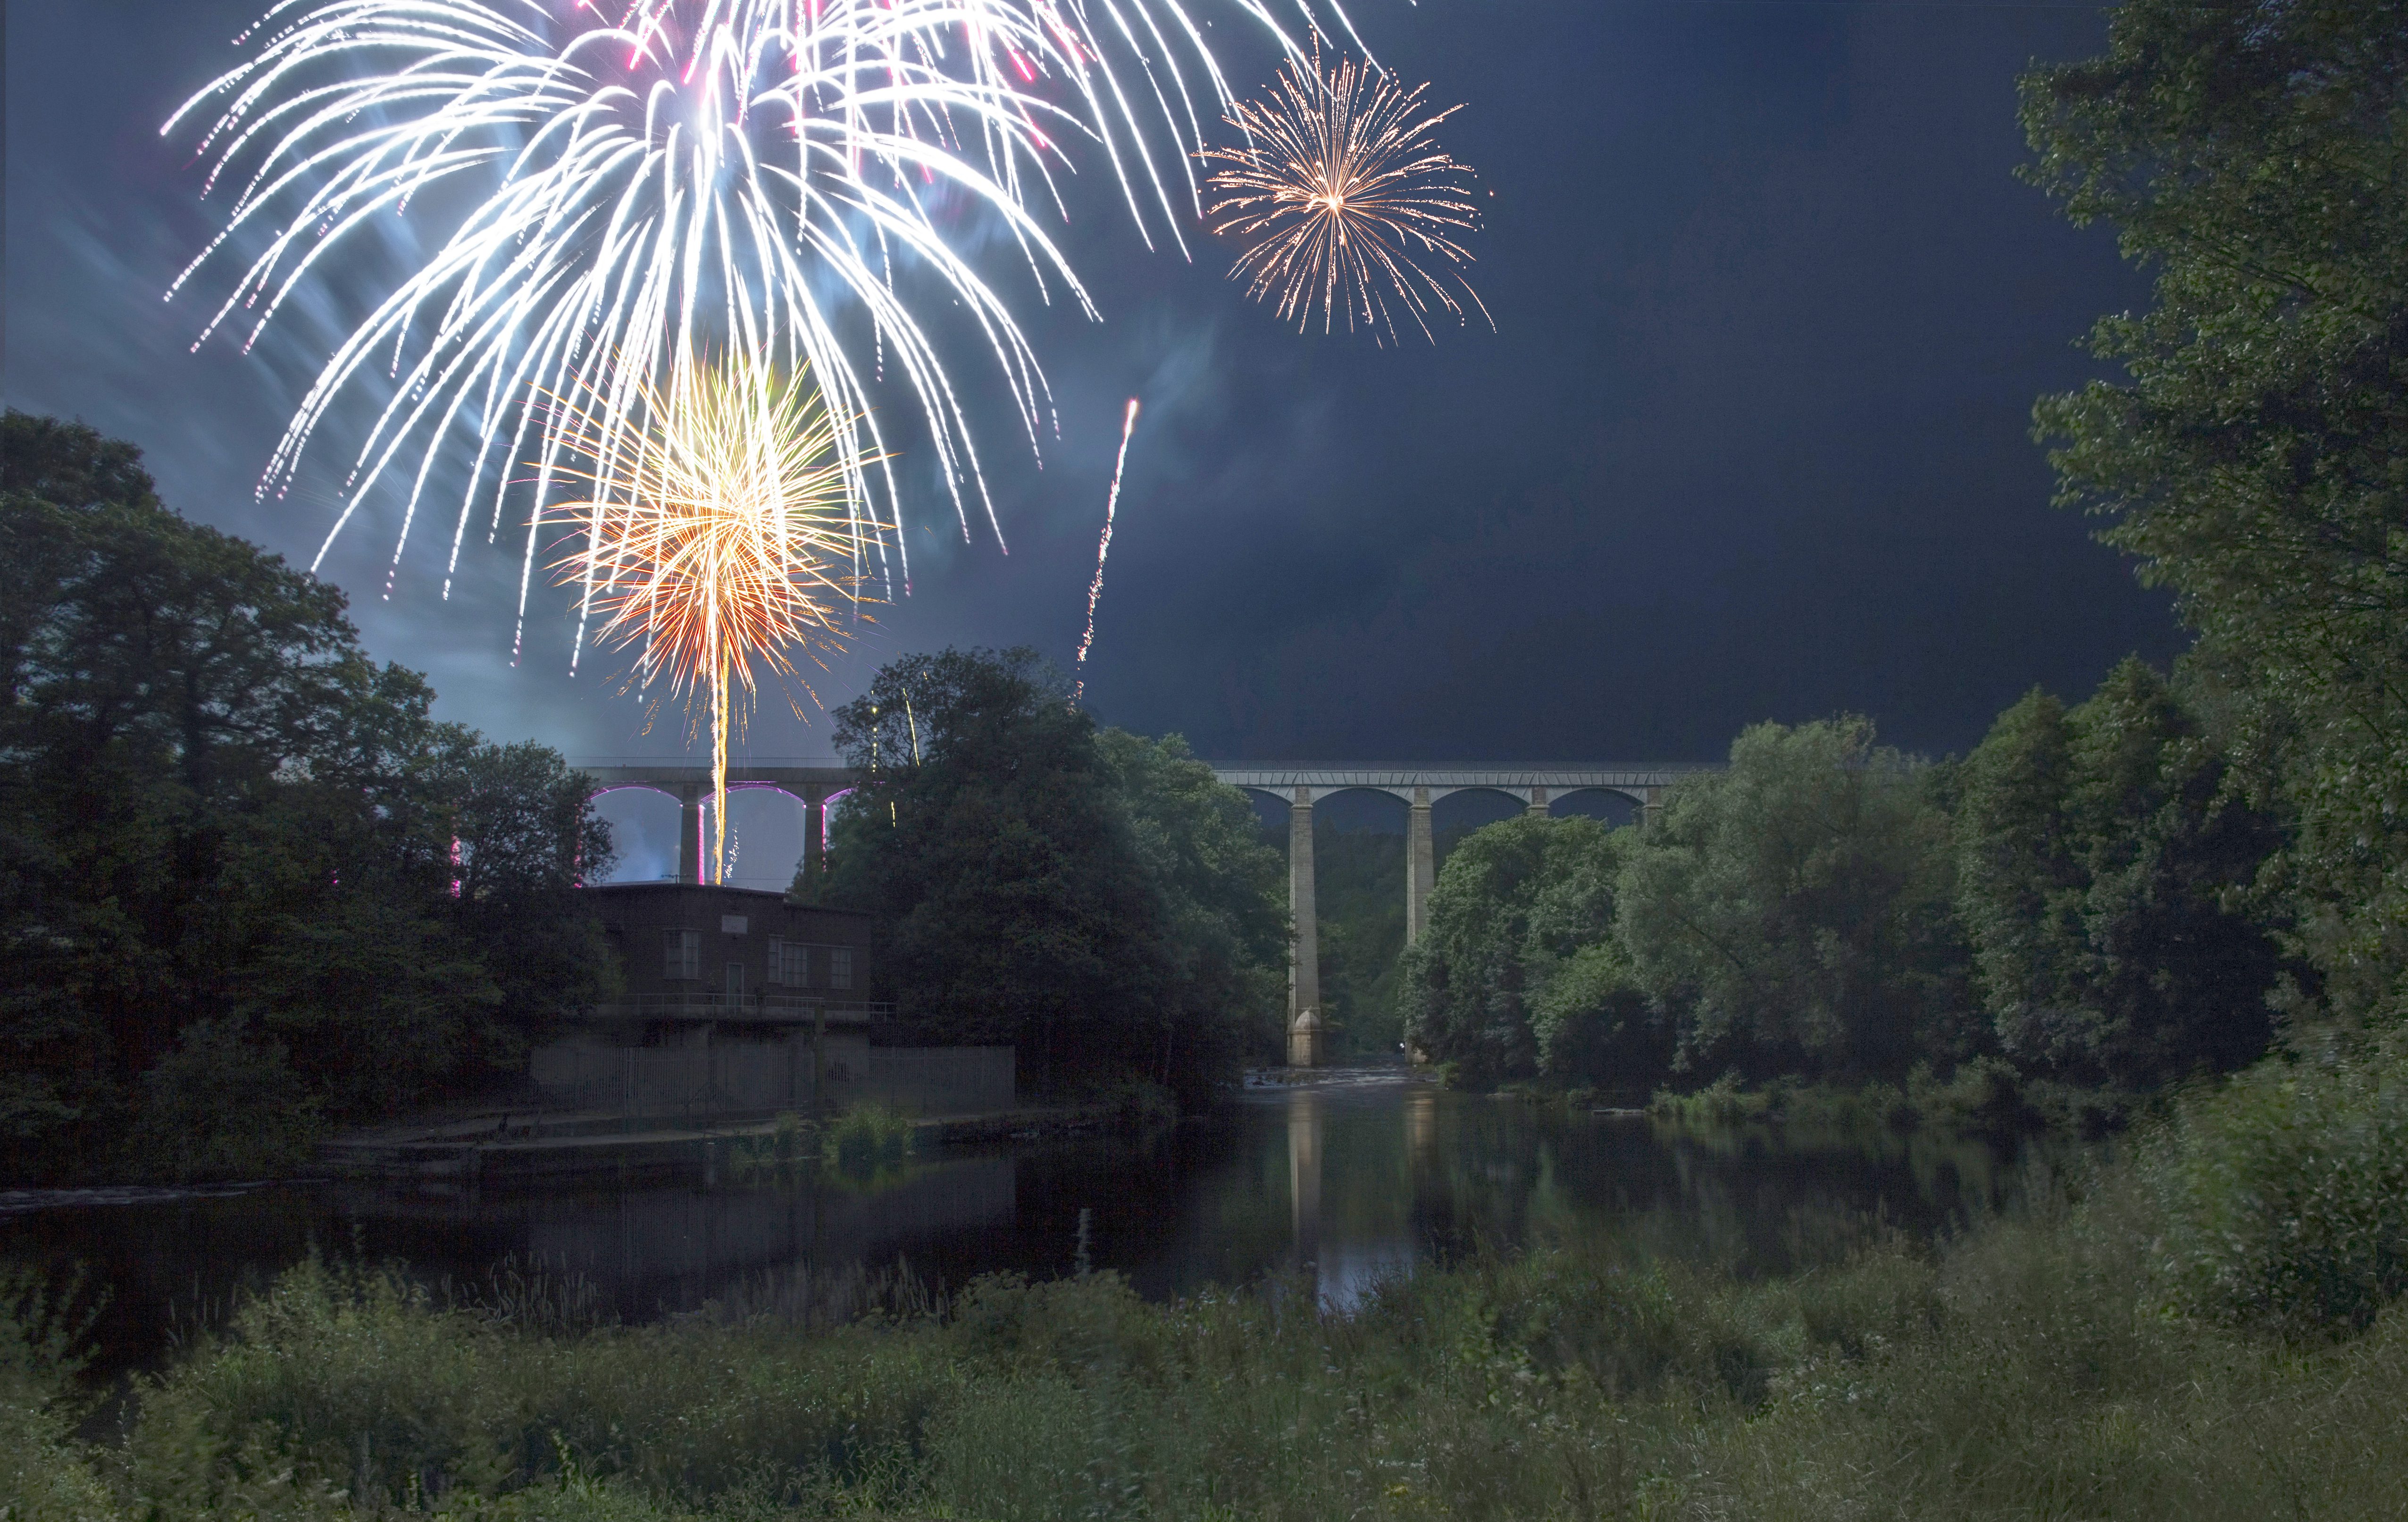 Take a look at our July winner for the Wonders of Wrexham 2017 Calendar